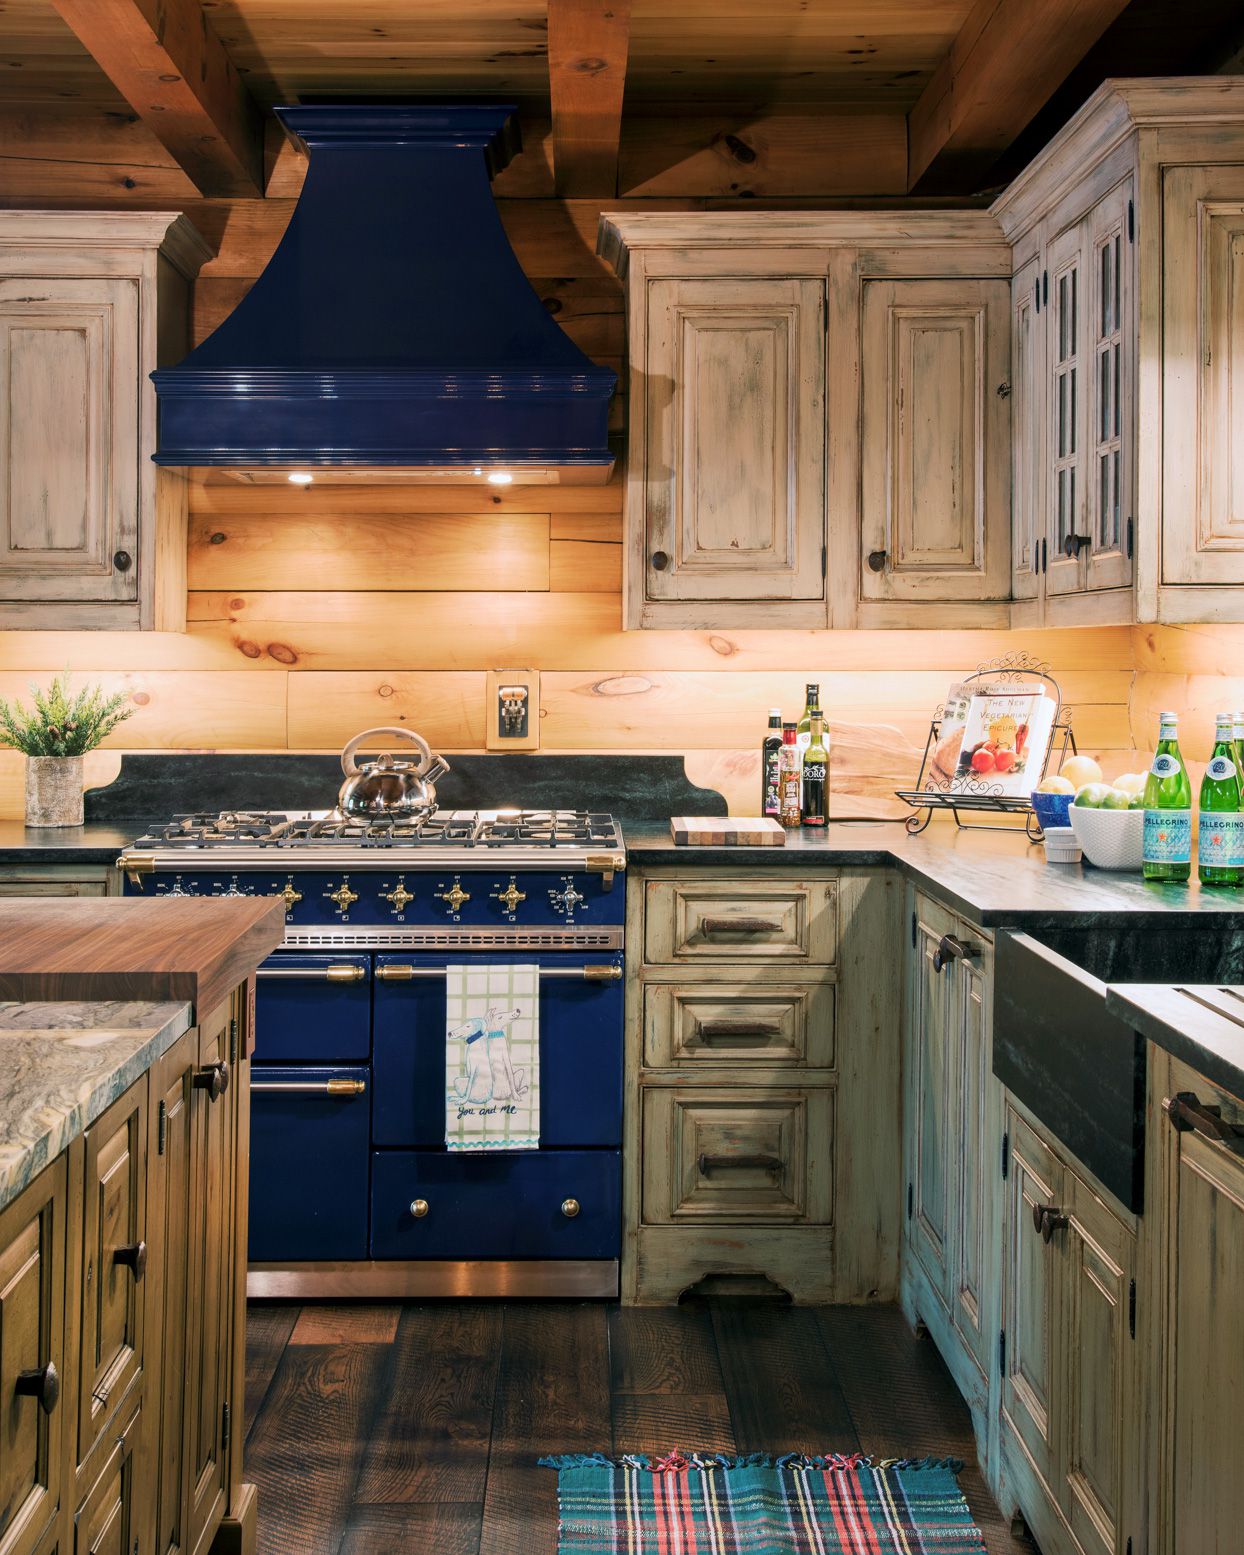 Adding Vibrance: The Appeal of Colored Kitchen Appliances缩略图